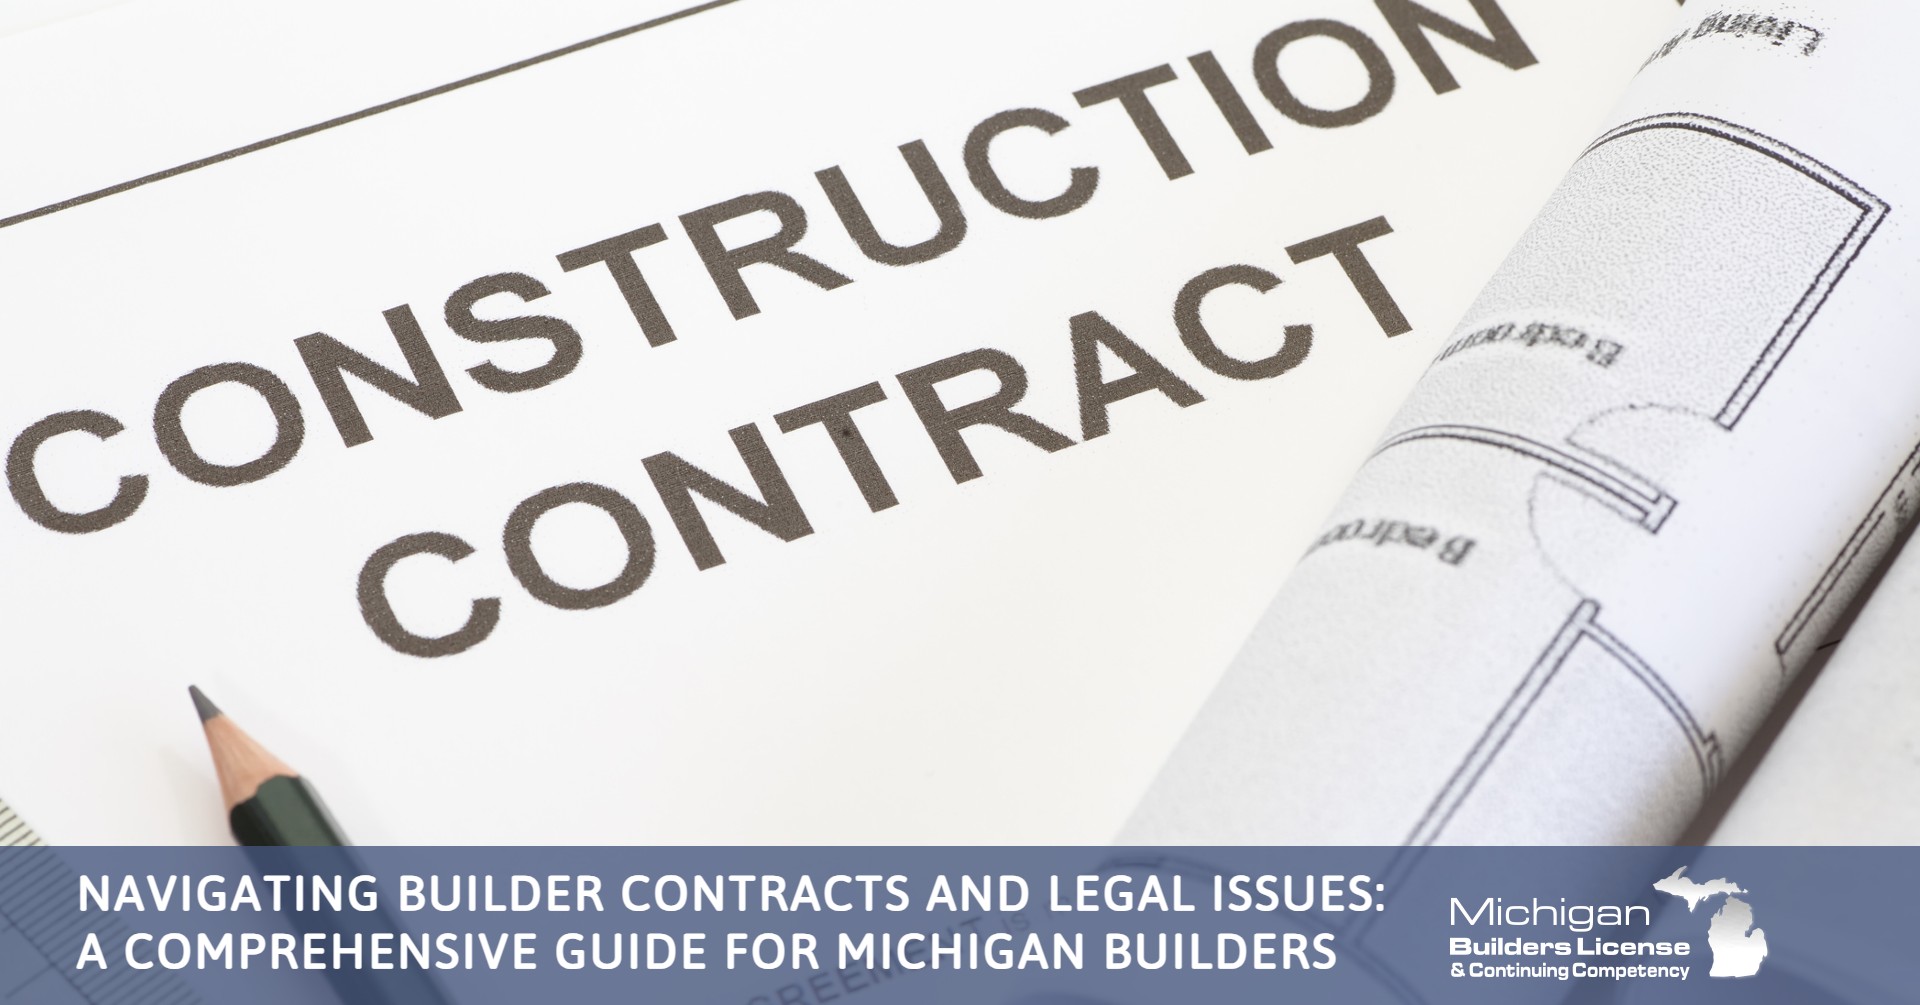 Navigating Builder Contracts and Legal Issues: A Guide for Michigan Builders